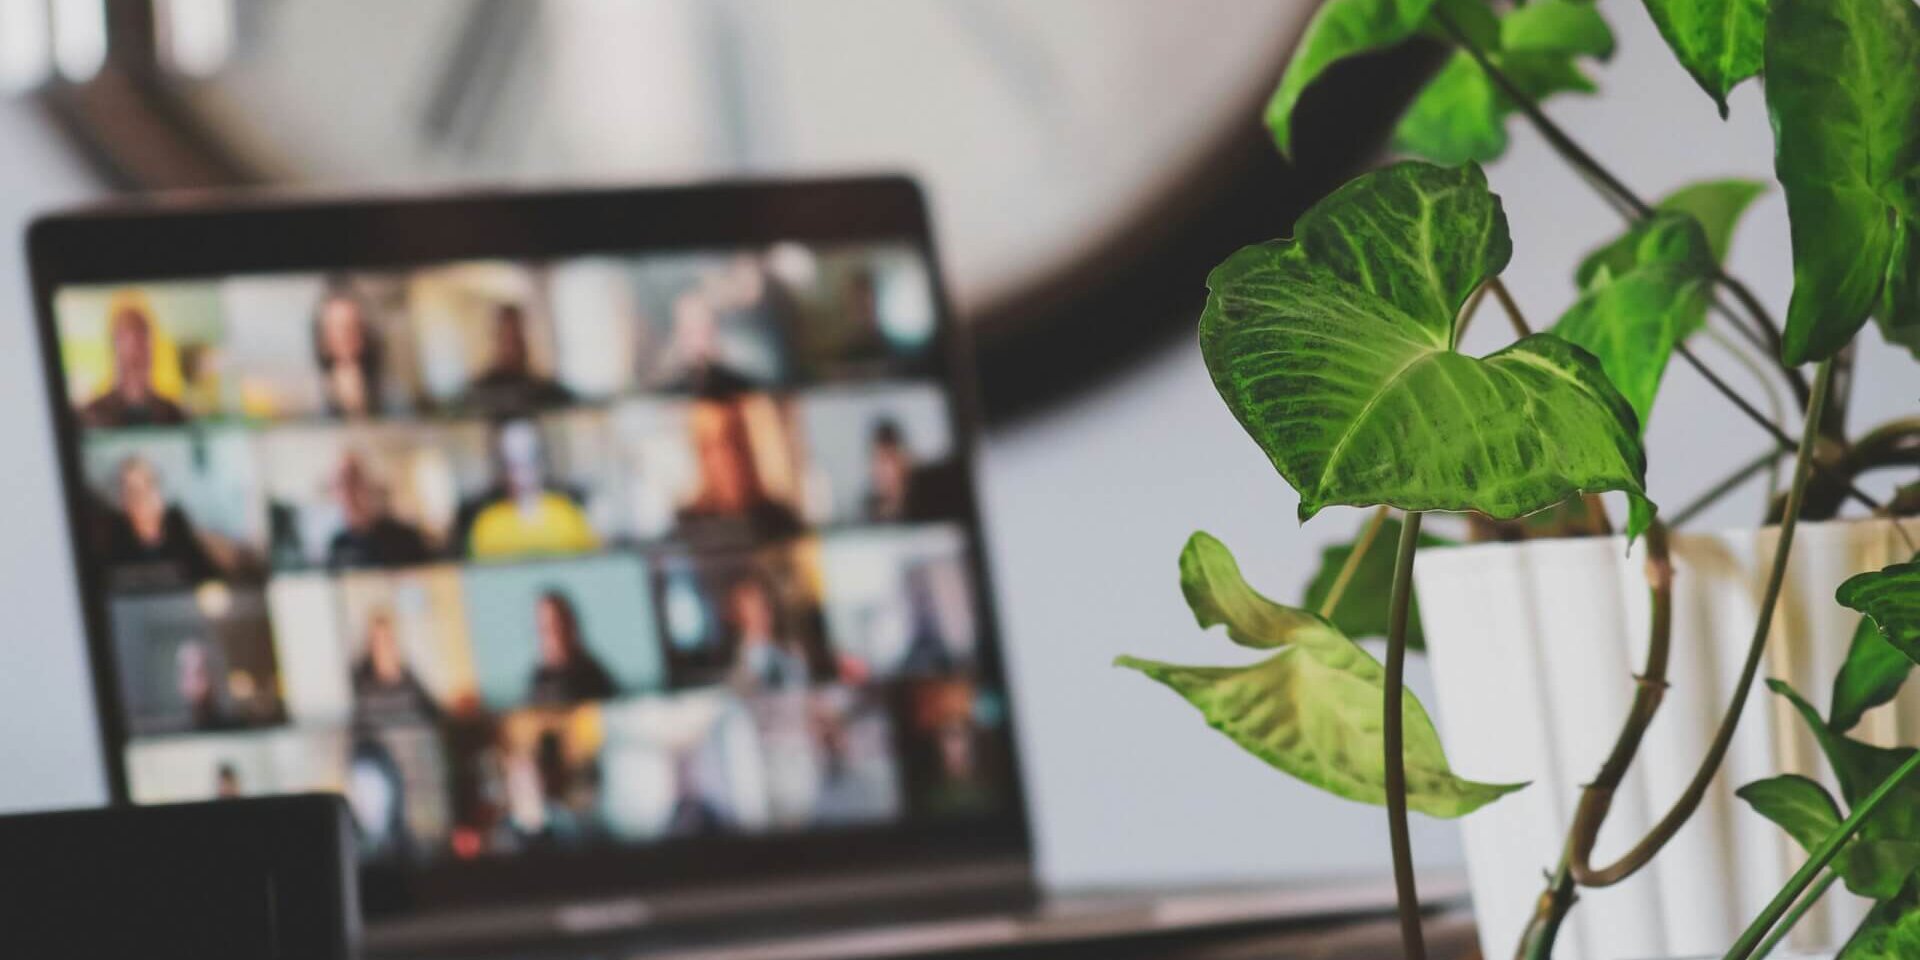 Online meeting on a laptop in the foreground and a plant on the right side of the picture